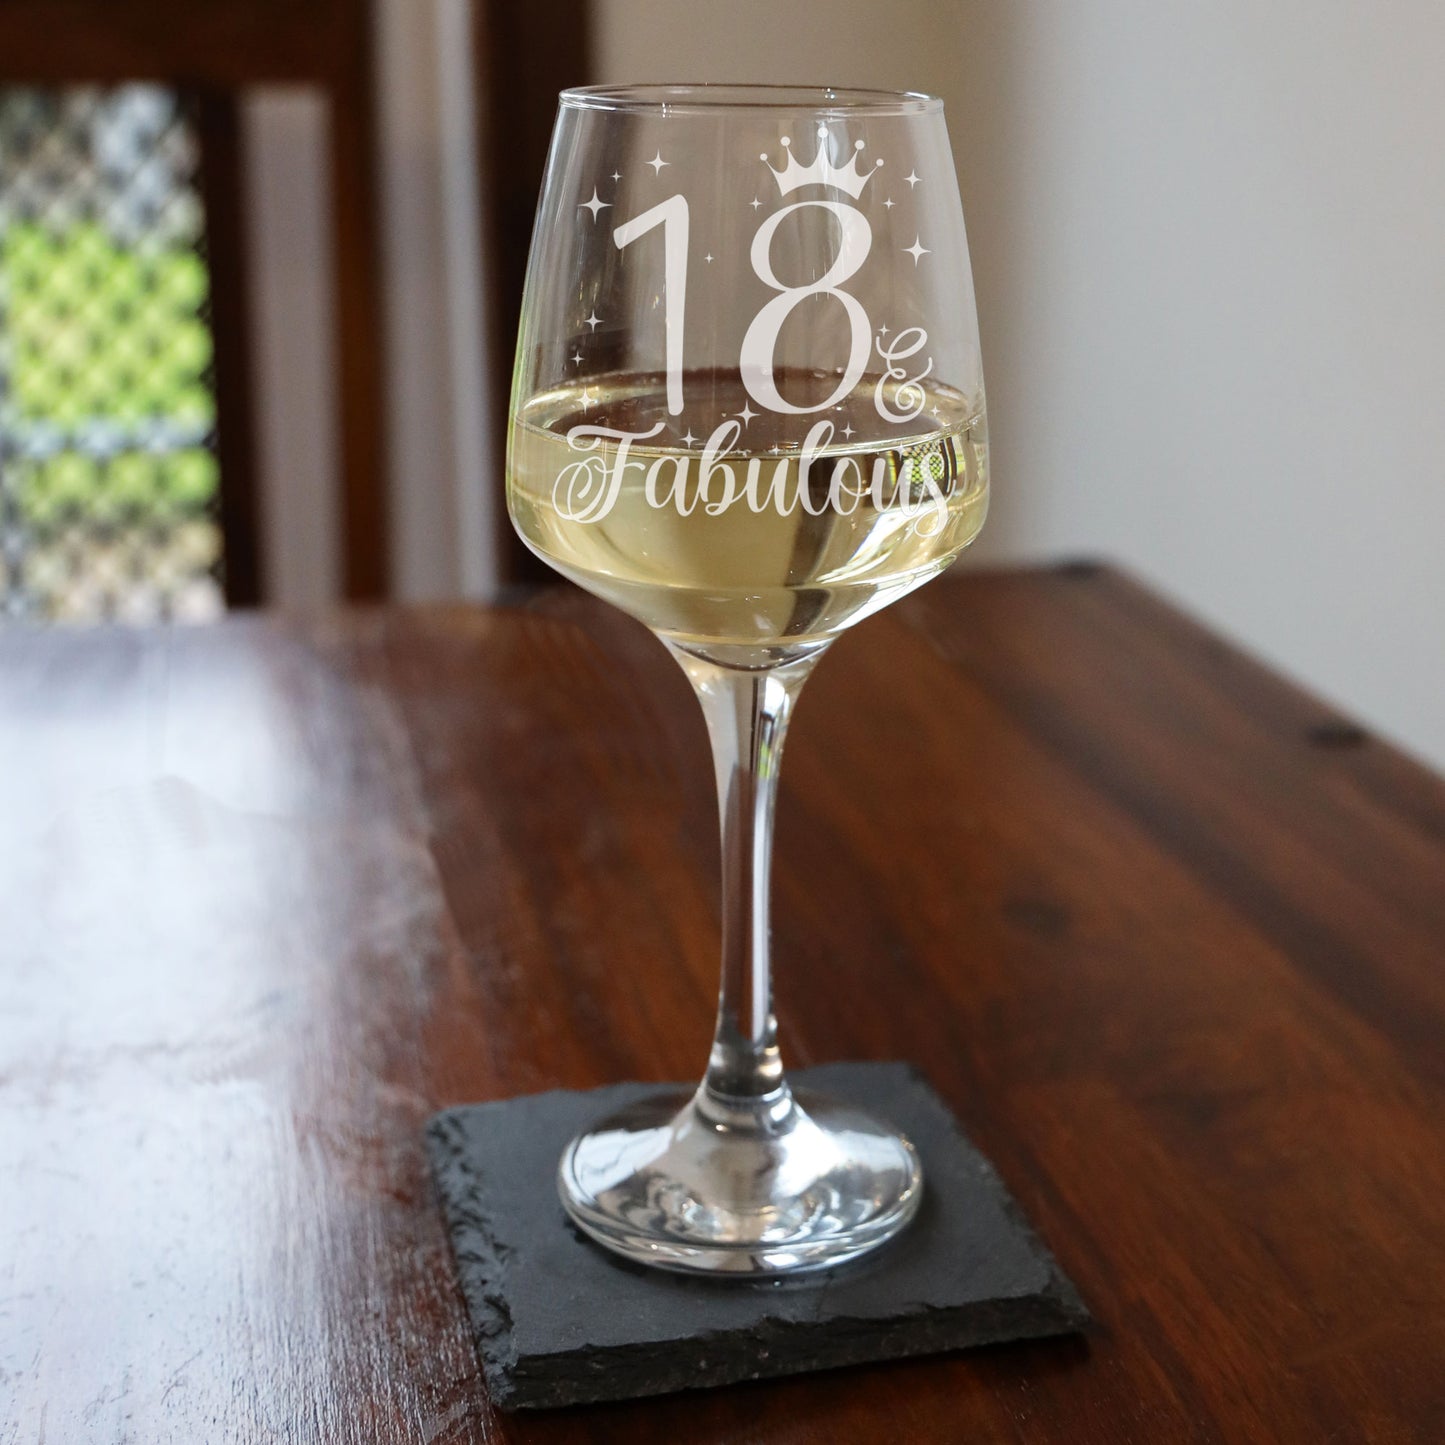 18 & Fabulous 18th Birthday Gift Engraved Wine Glass and/or Coaster Set  - Always Looking Good - Wine Glass Only  